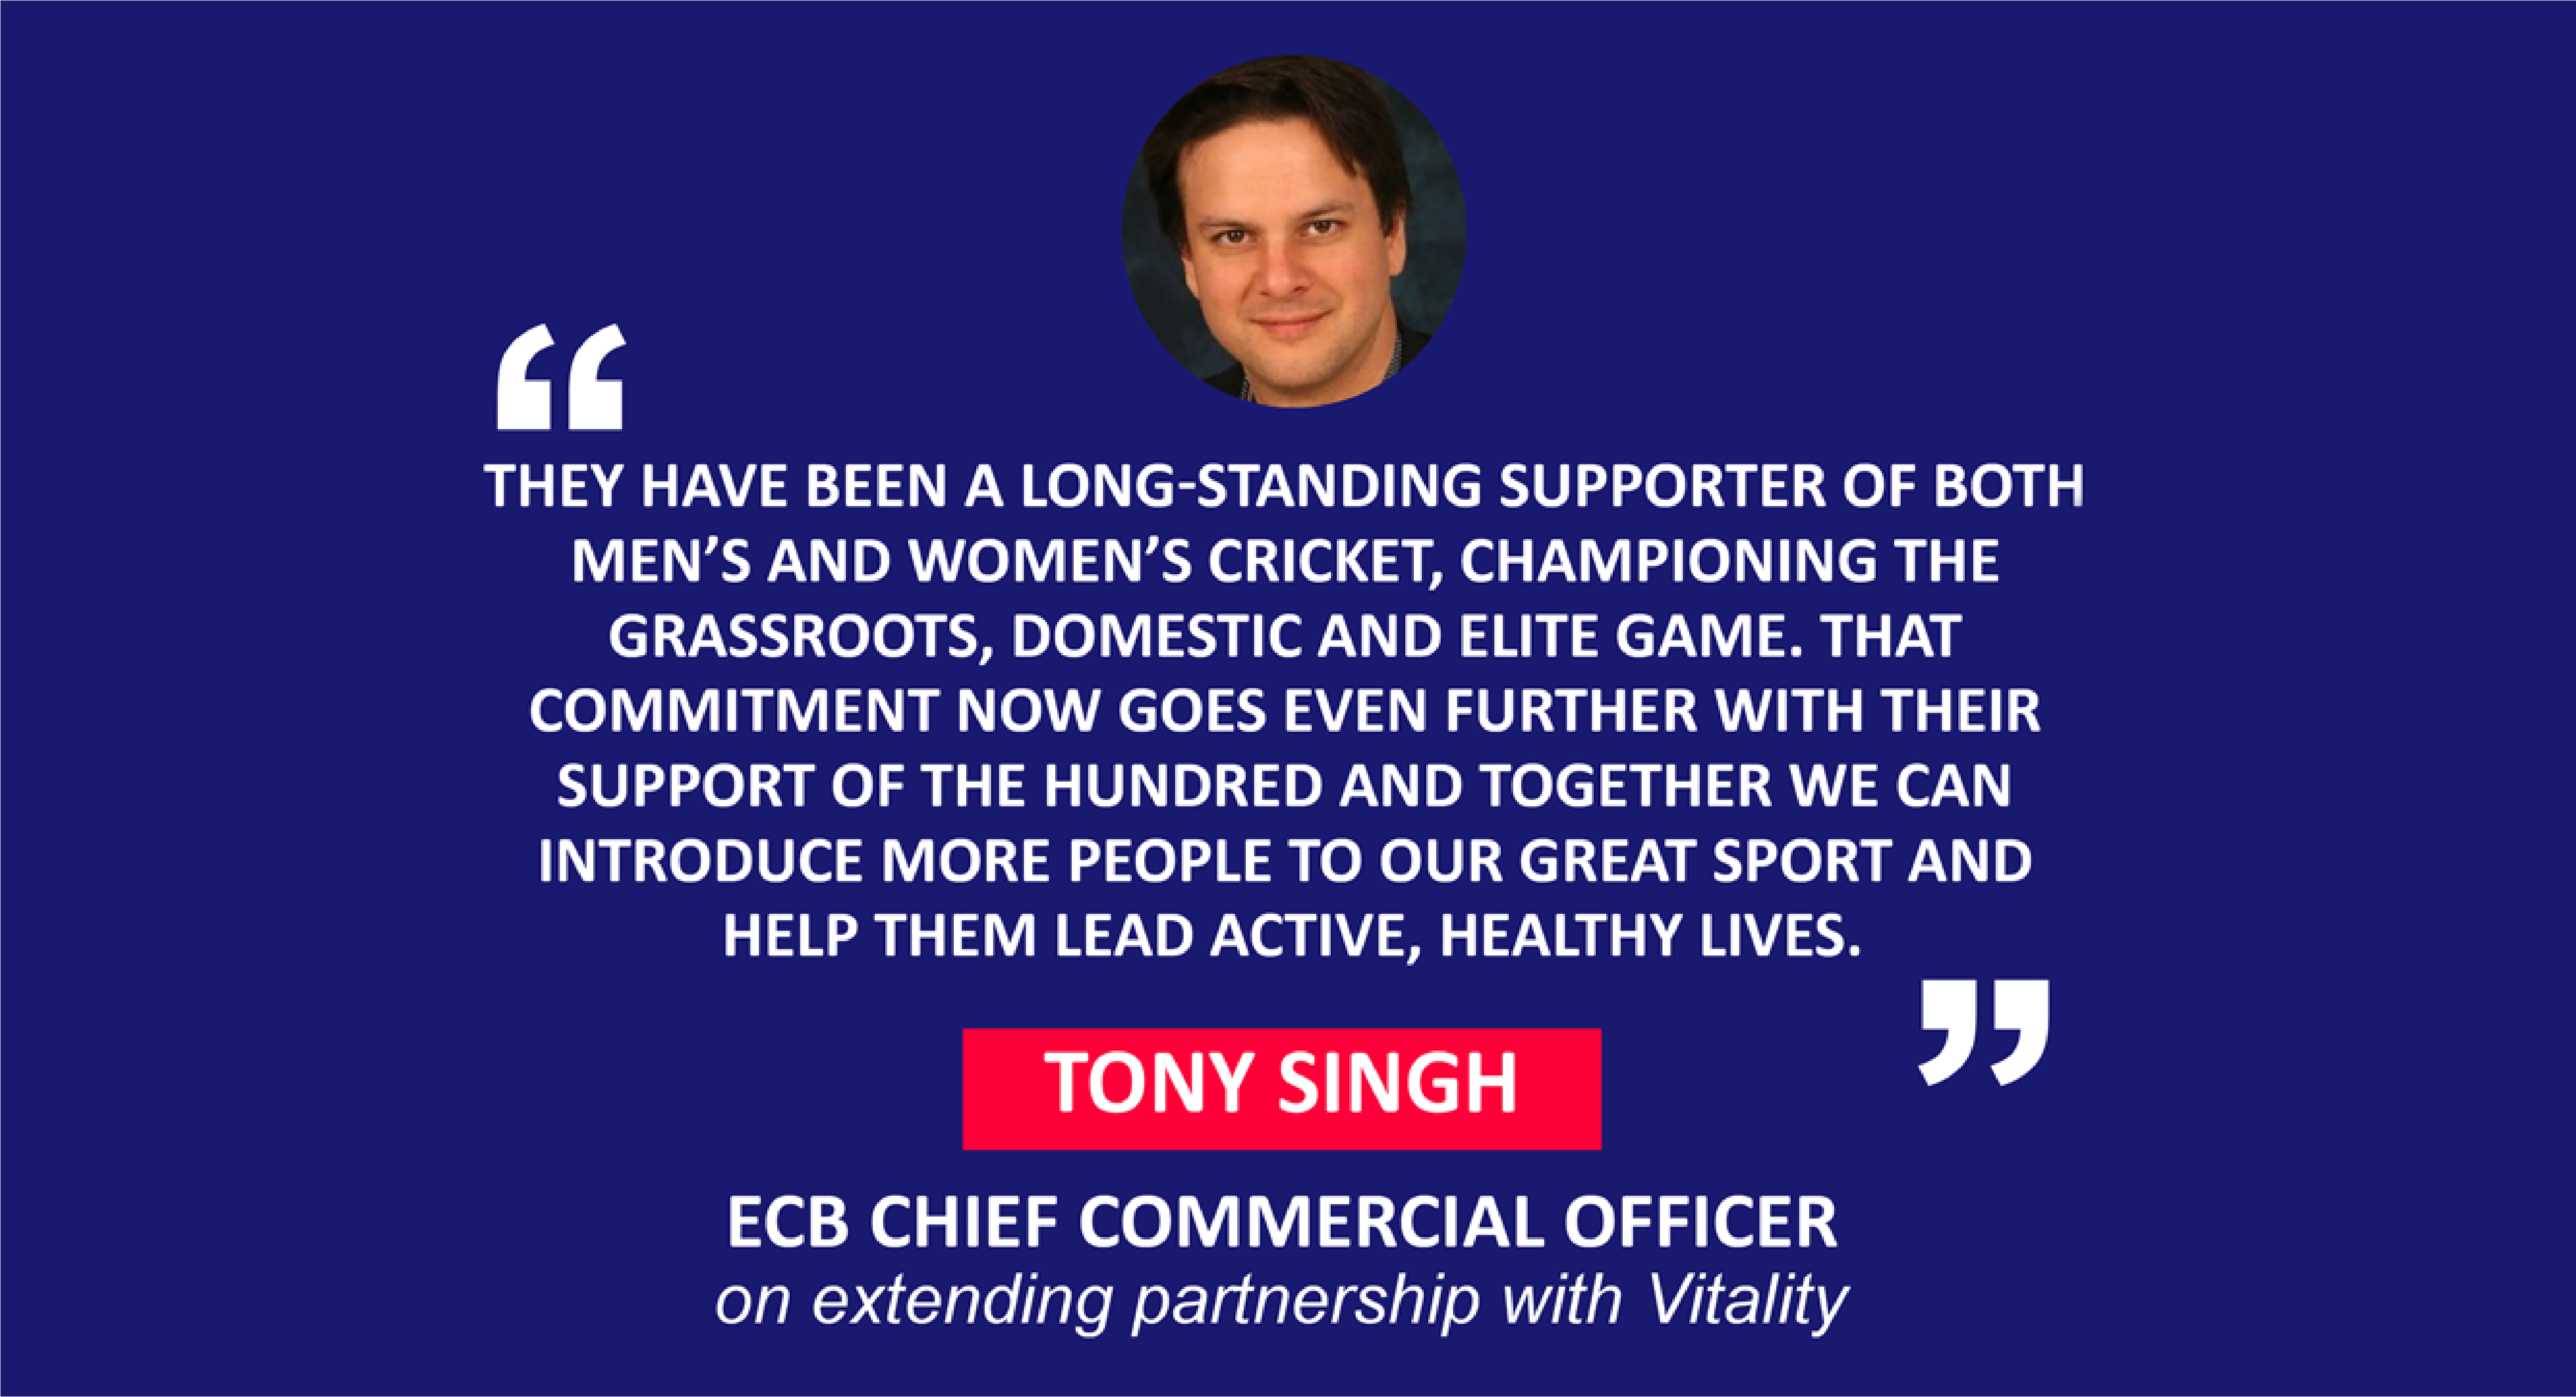 Tony Singh, ECB Chief Commercial Officer on extending partnership with Vitality